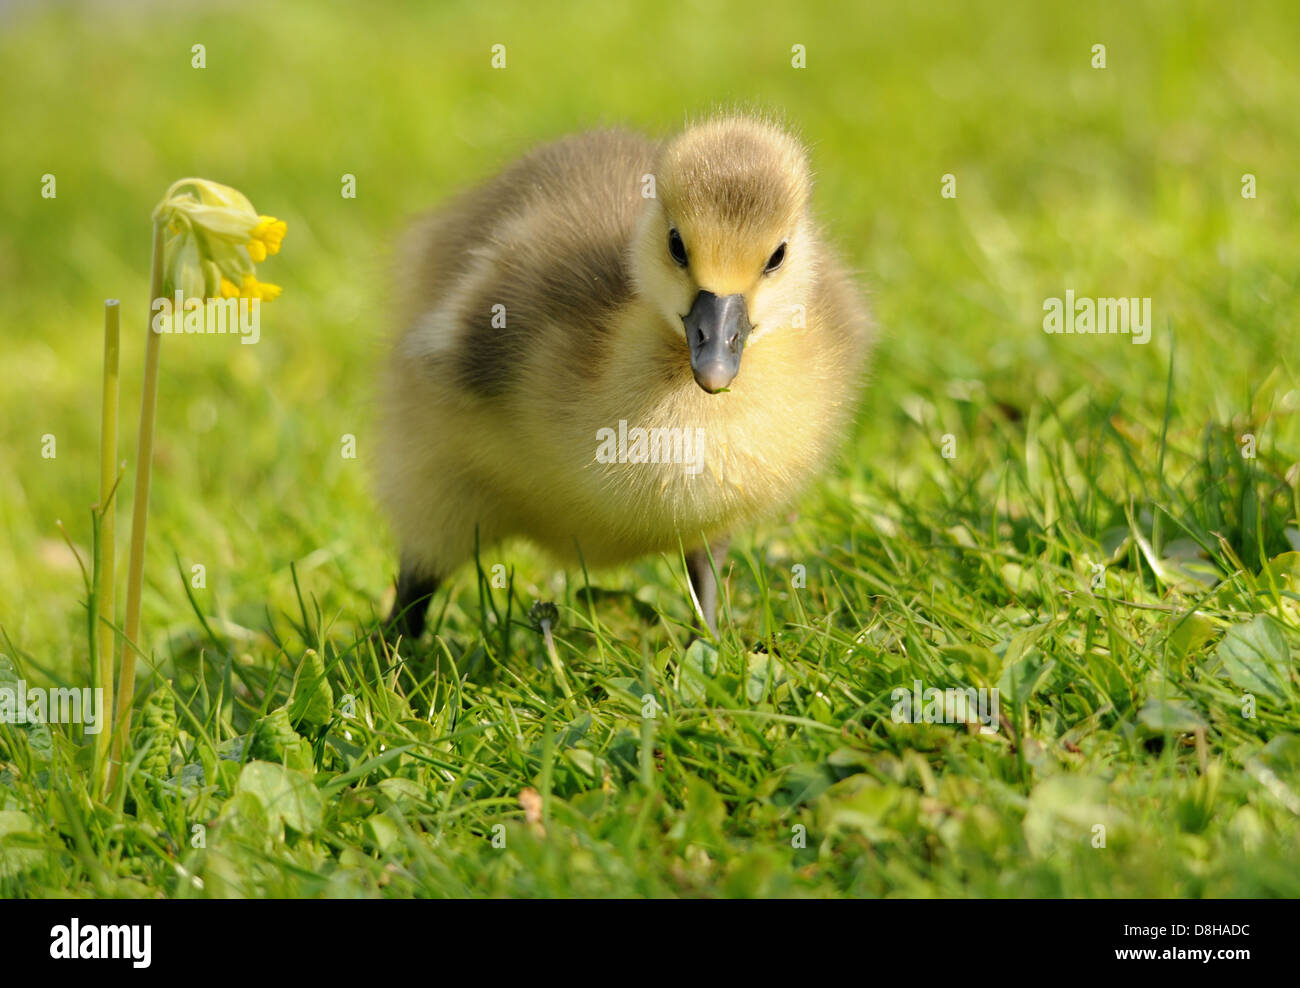 Chick discovers the world Stock Photo